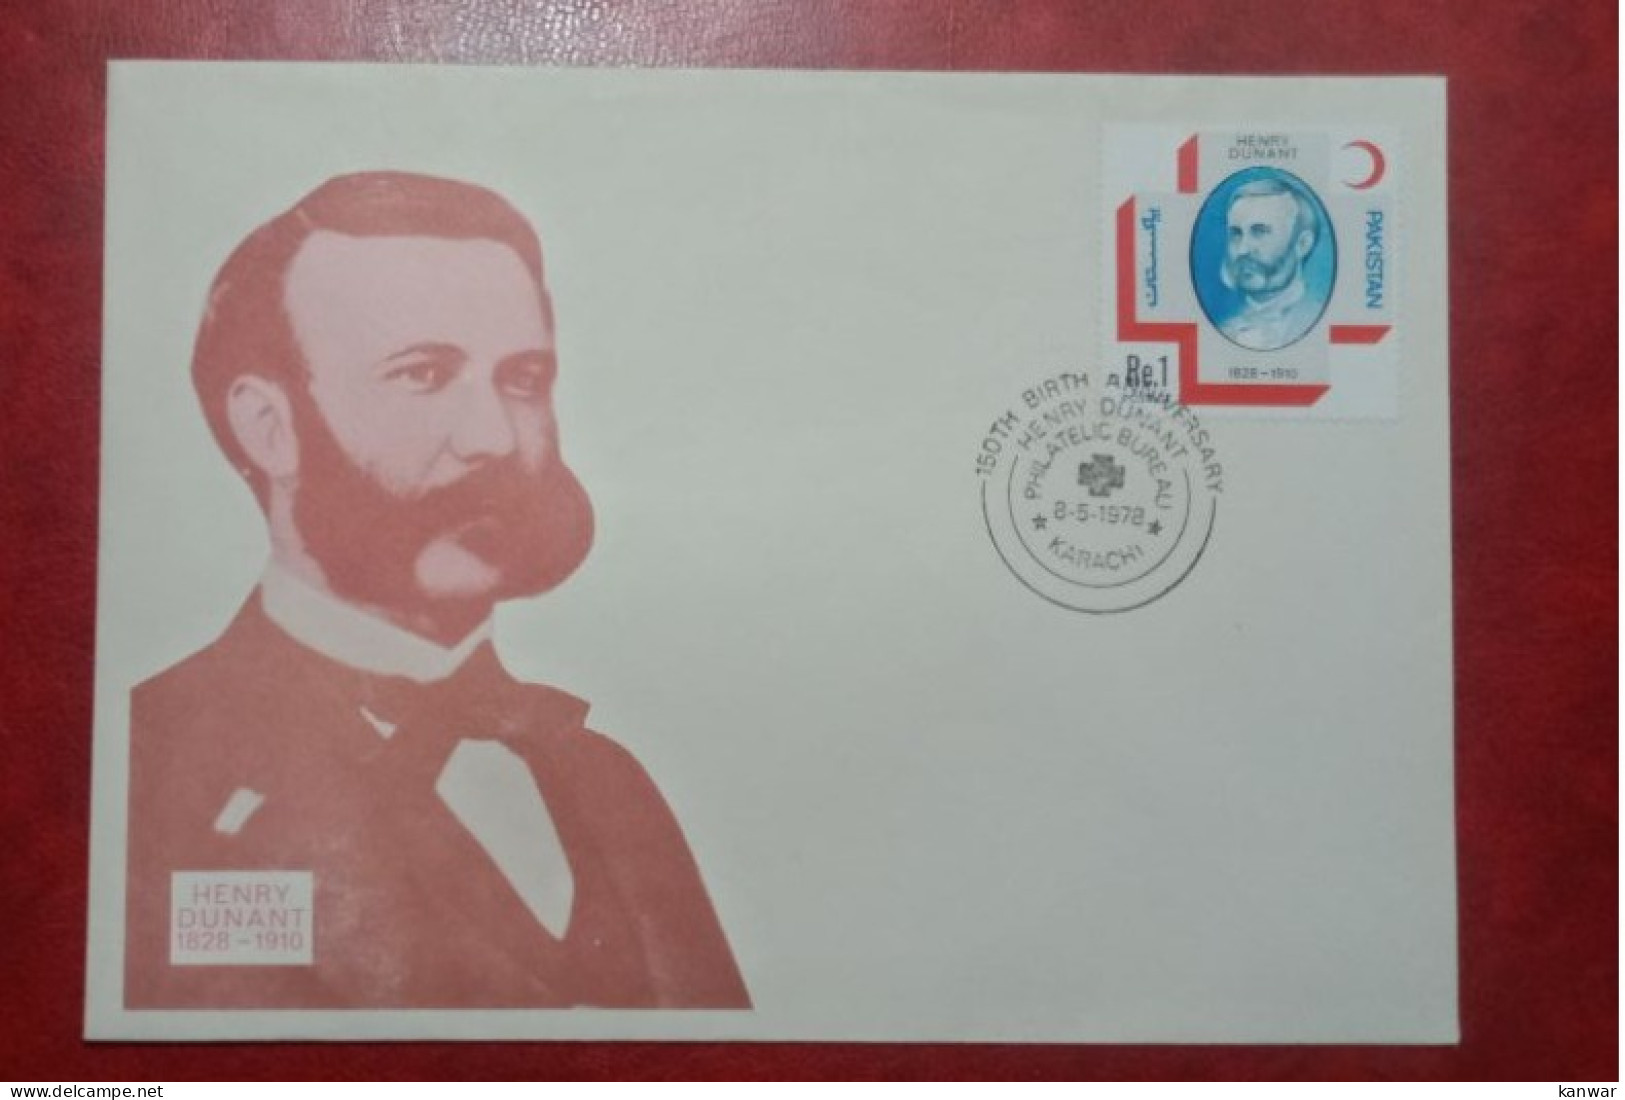 1978 PAKISTAN FDC COVER WITH STAMP HENRY DUNANT 150TH BIRTH ANNIVERSARY - Pakistan